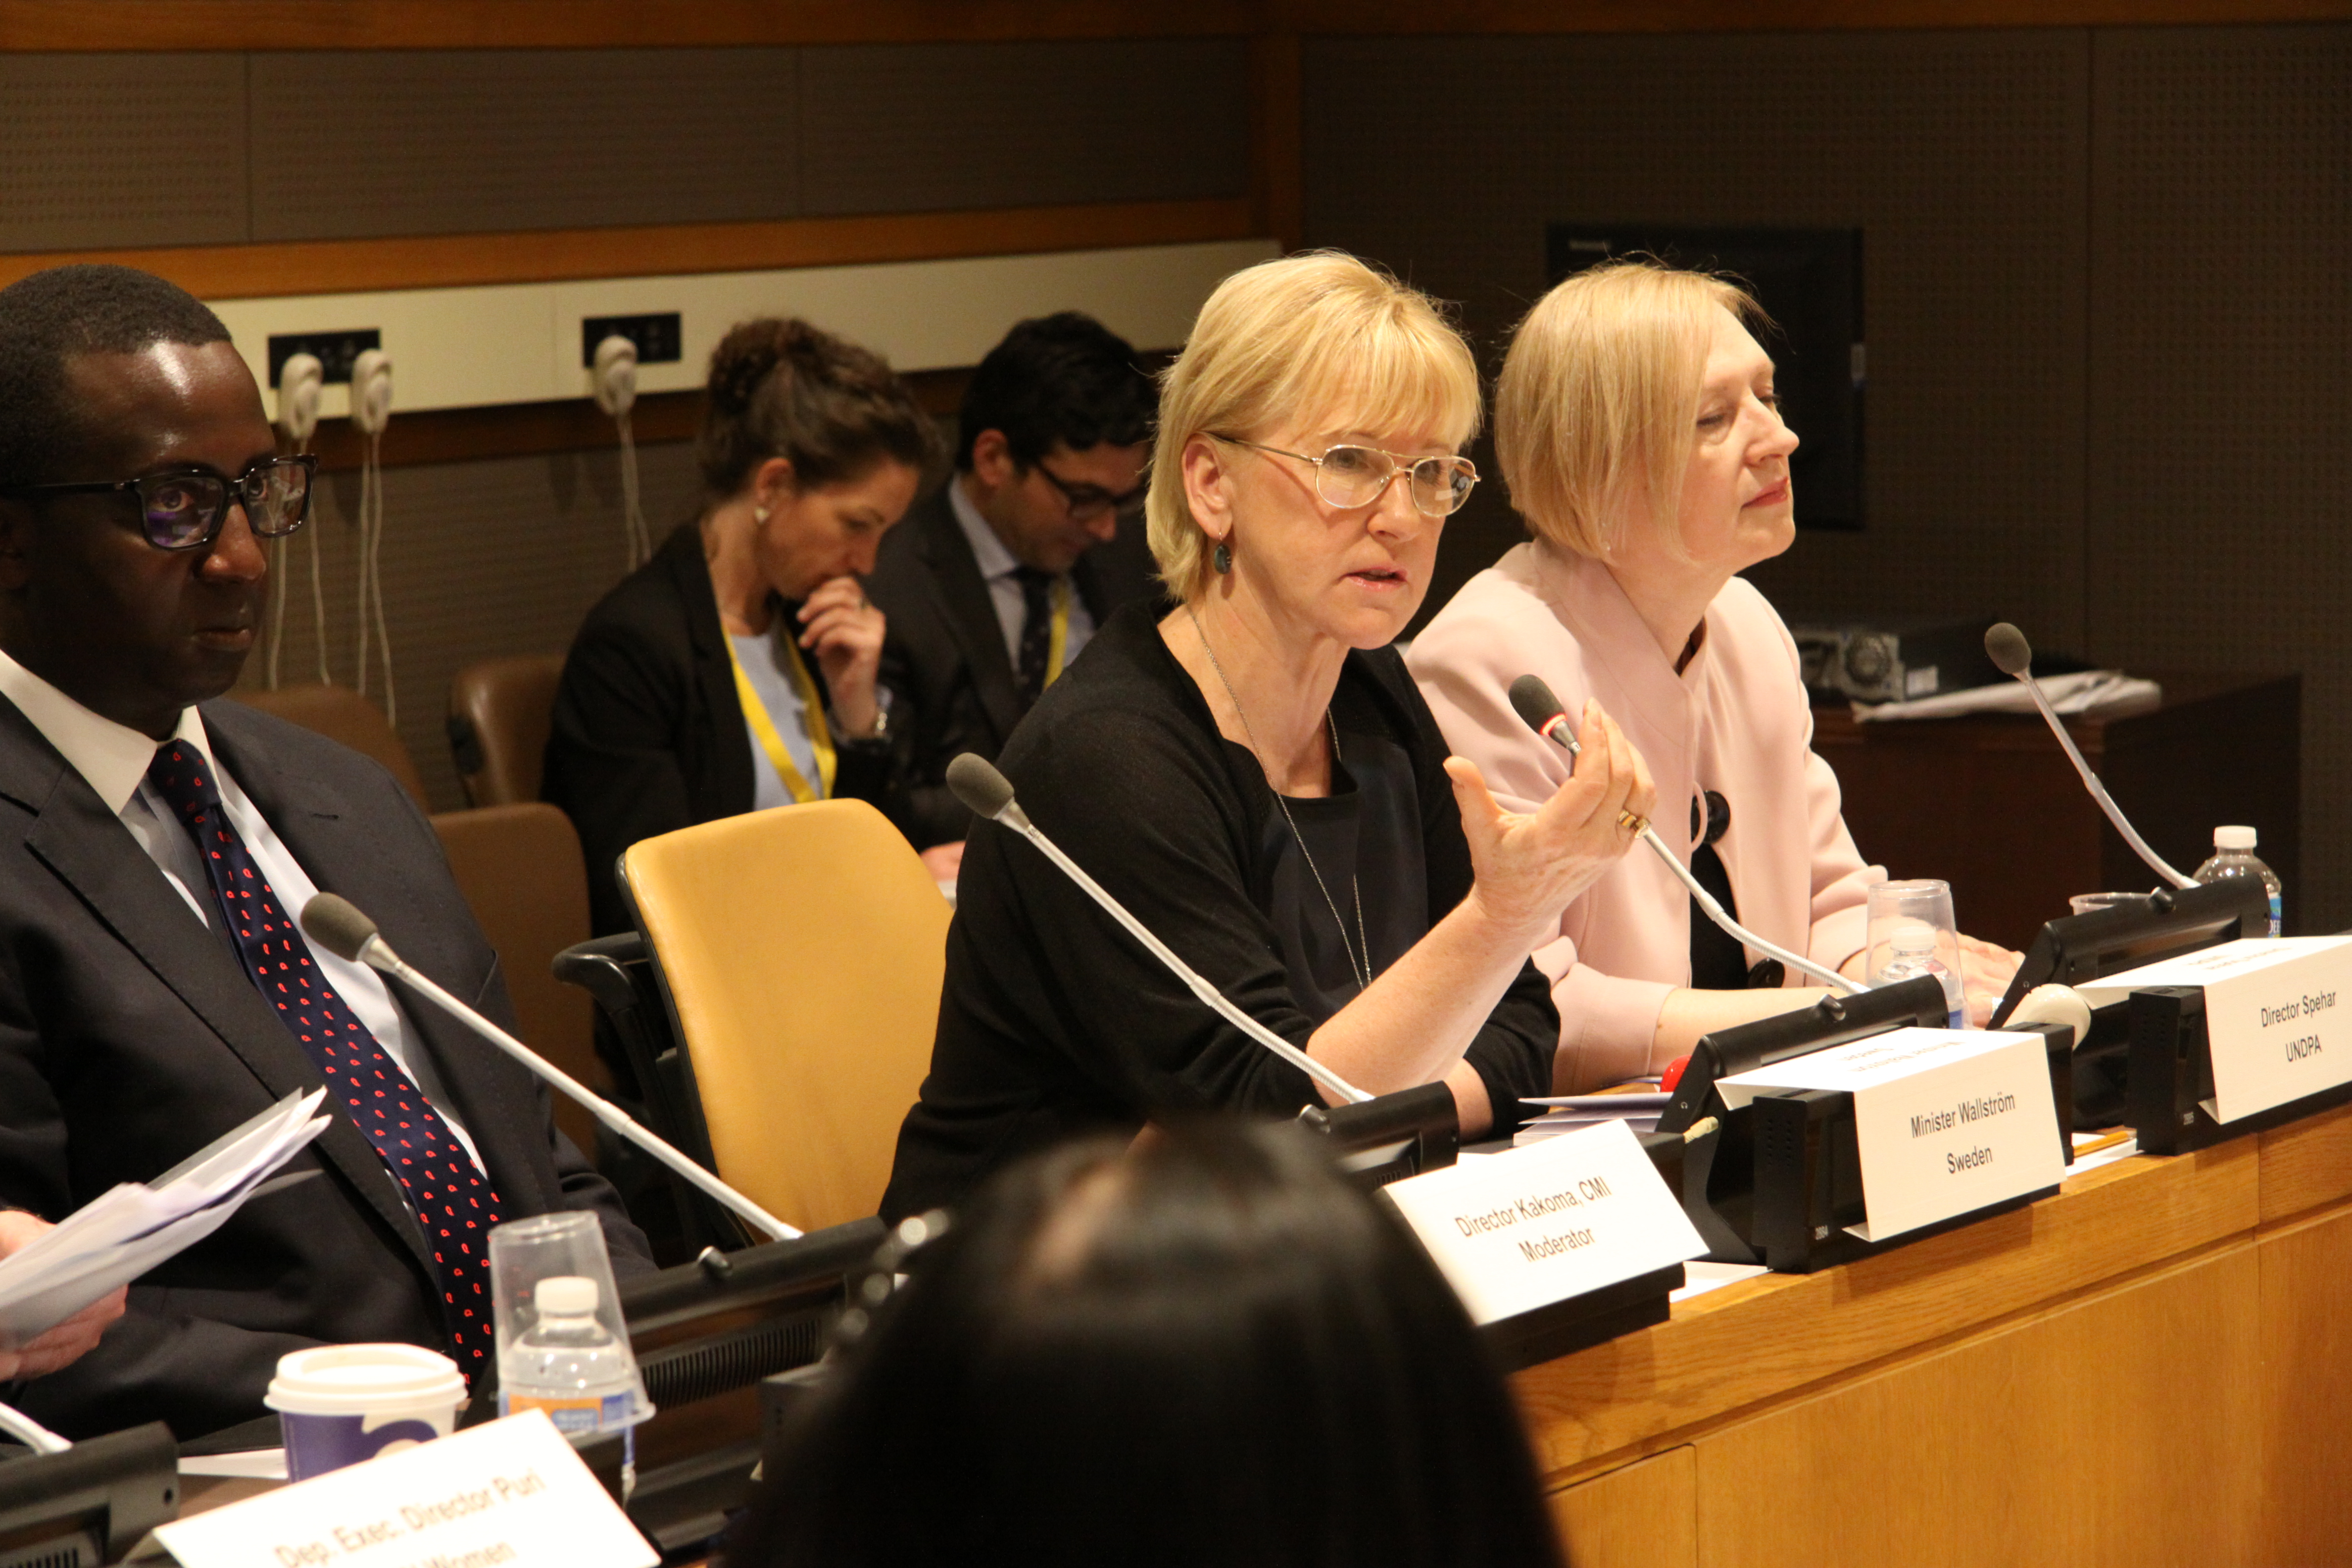 CMI’s Itonde Kakoma (left), Swedish Foreign Minister Margot Wallström and Director of the Policy and Mediation Division at the UN headquarters Elizabeth Spehar at the high level meeting on women in mediation last week.